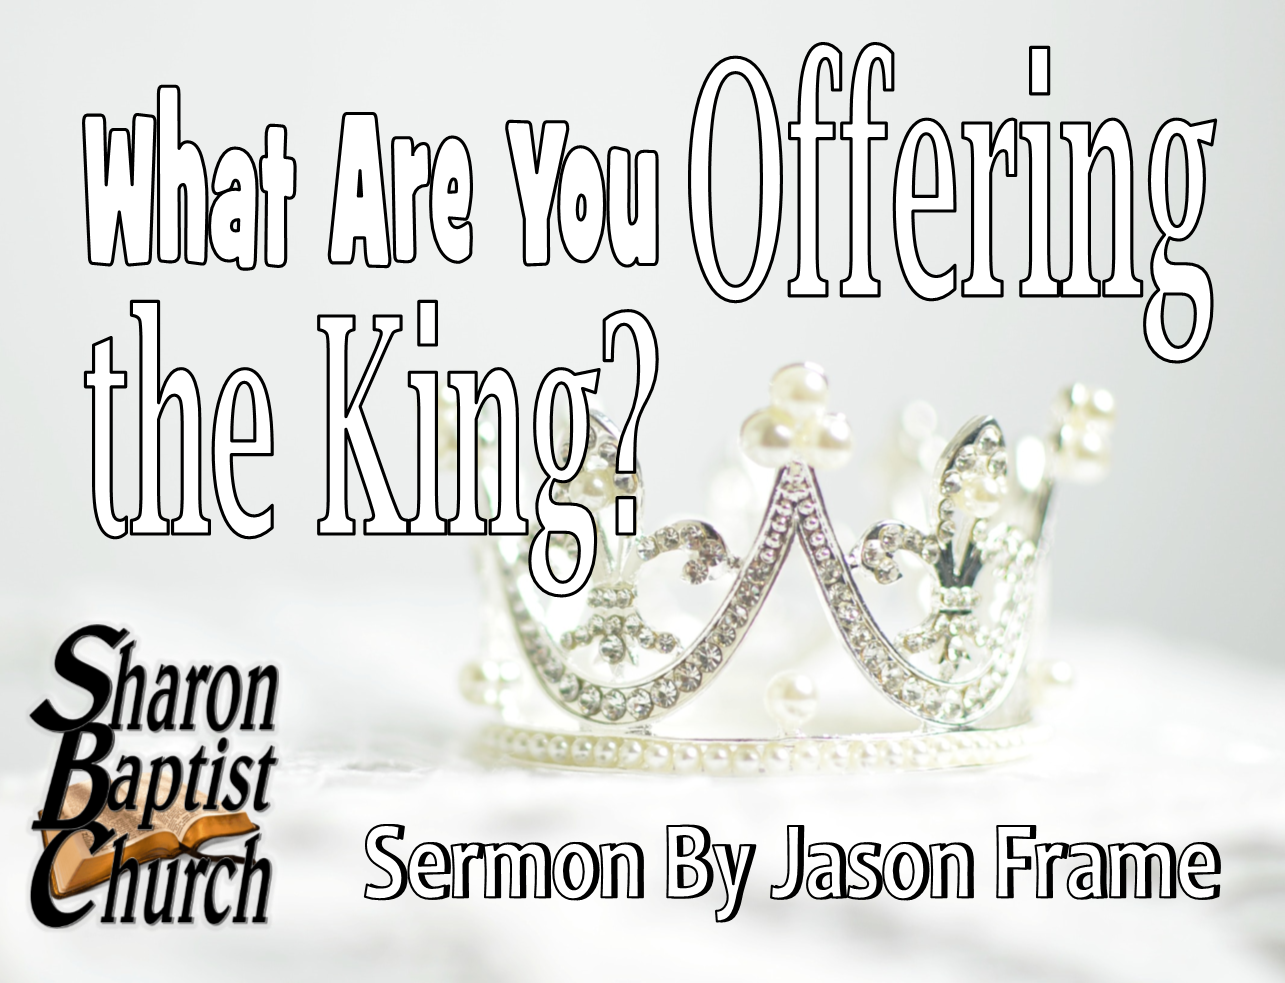 What are you offering the King - sermon by guest Jason Frame 10-16-19